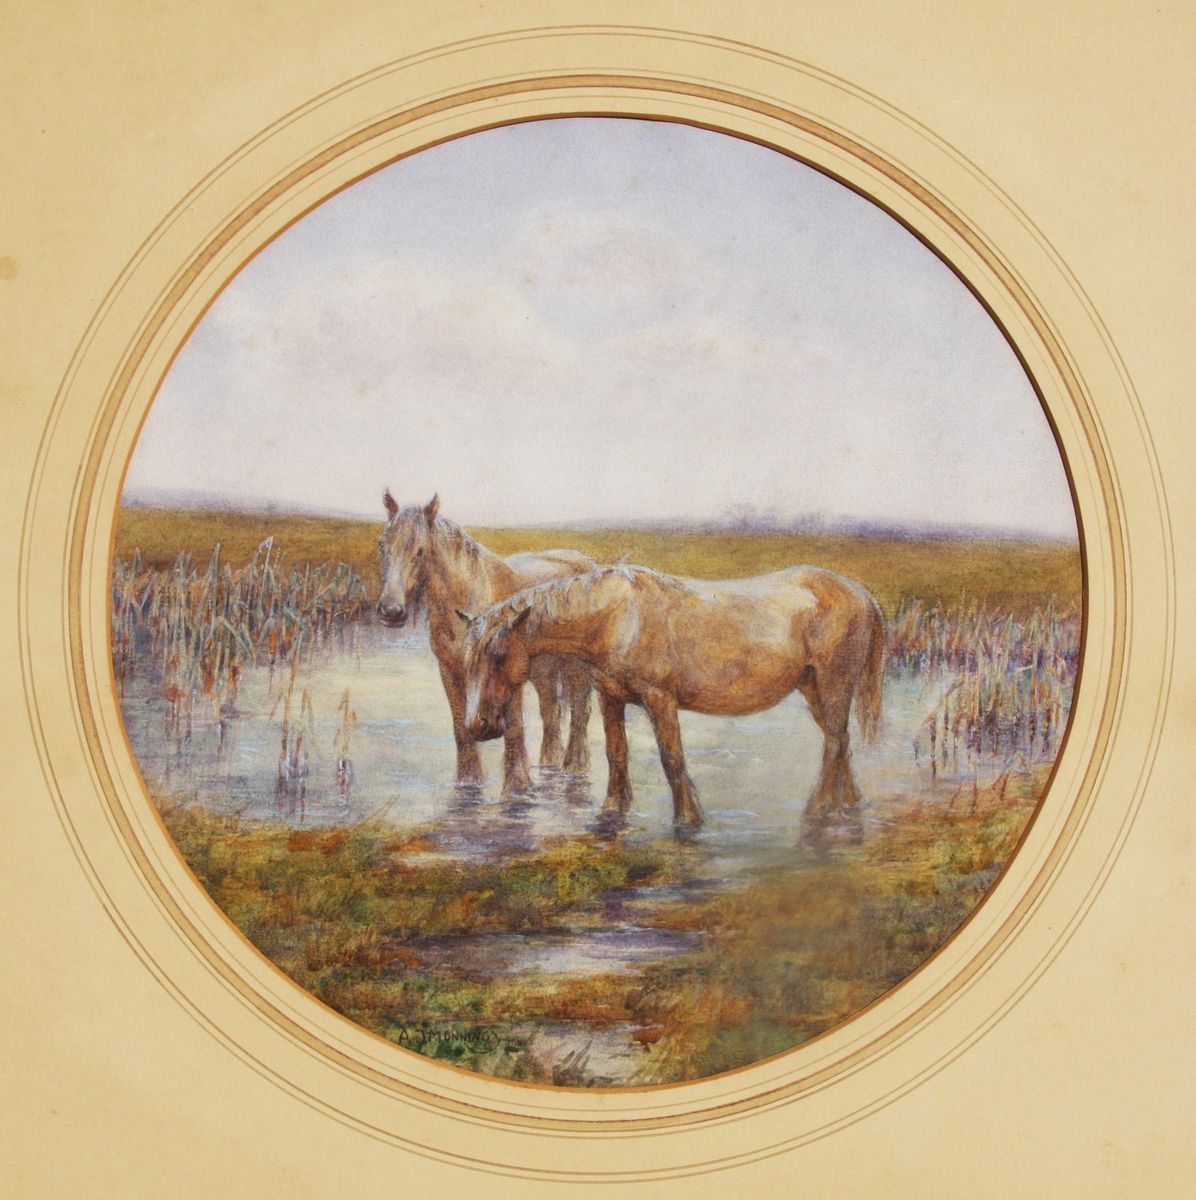 SIR ALFRED JAMES MUNNINGS dated 1910, IMPORTANT LISTED ARTIST, w/c 